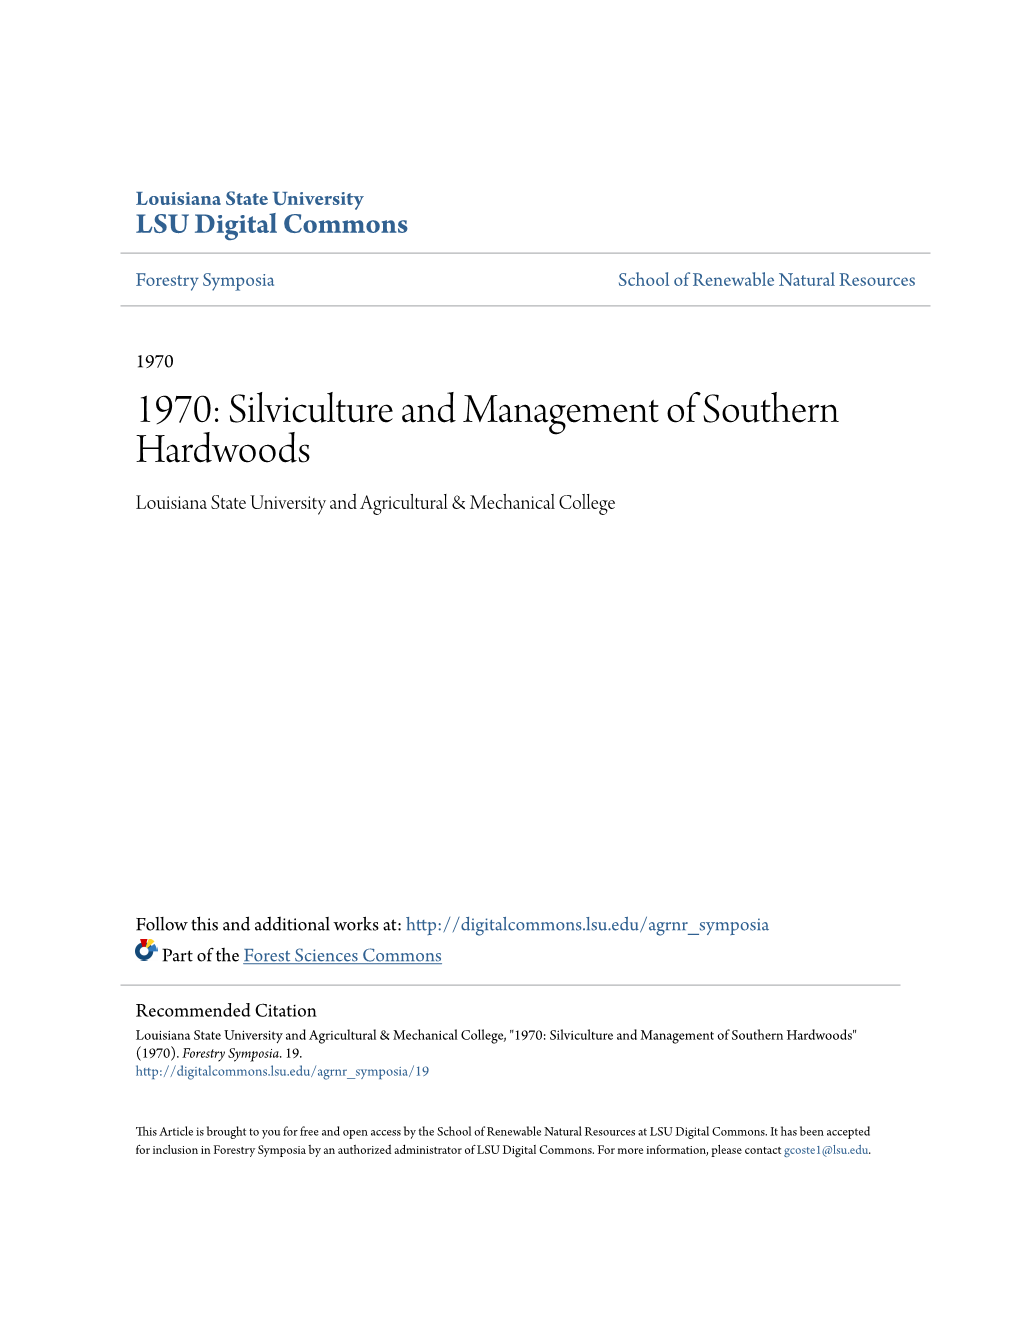 1970: Silviculture and Management of Southern Hardwoods Louisiana State University and Agricultural & Mechanical College